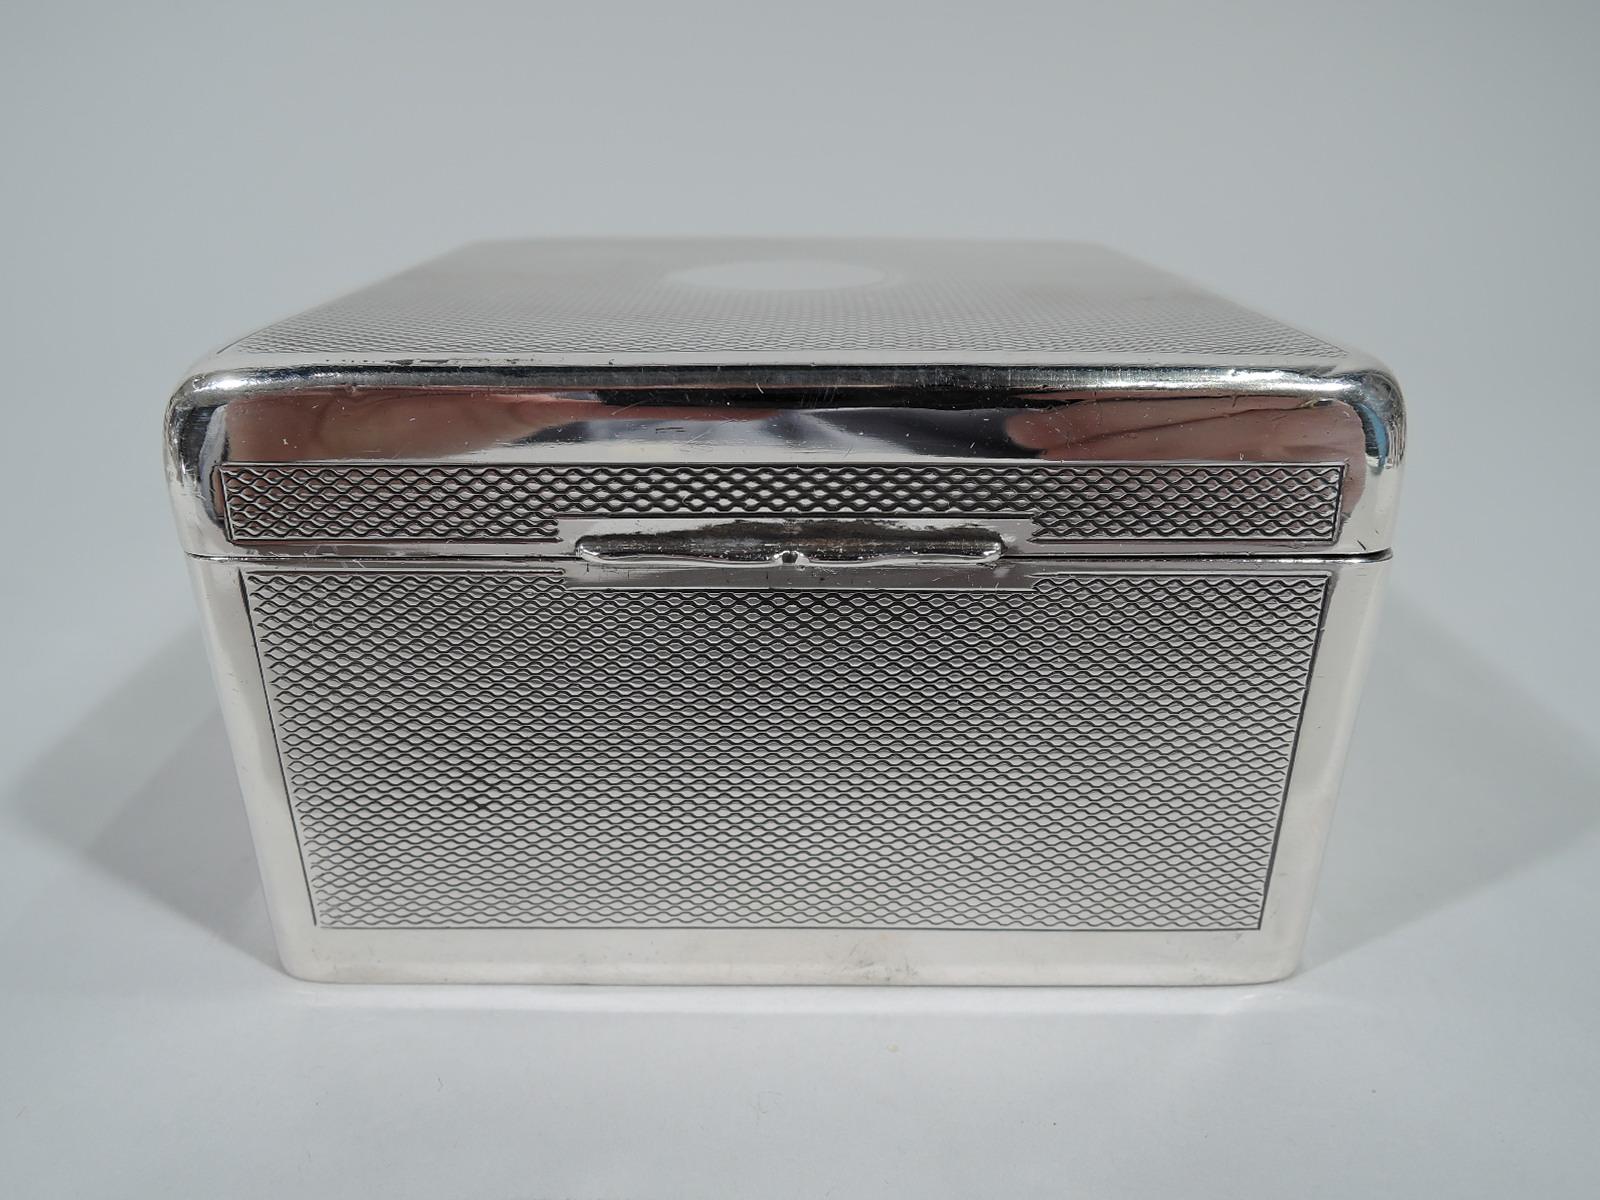 Smart and compact sterling silver box. Made by Arthur & John Zimmerman in Birmingham in 1899. Square with flat and hinged cover. All-over engine-turned ornament in plain frames. Cover has central circular mono plate (vacant) and scrolled tab. Box